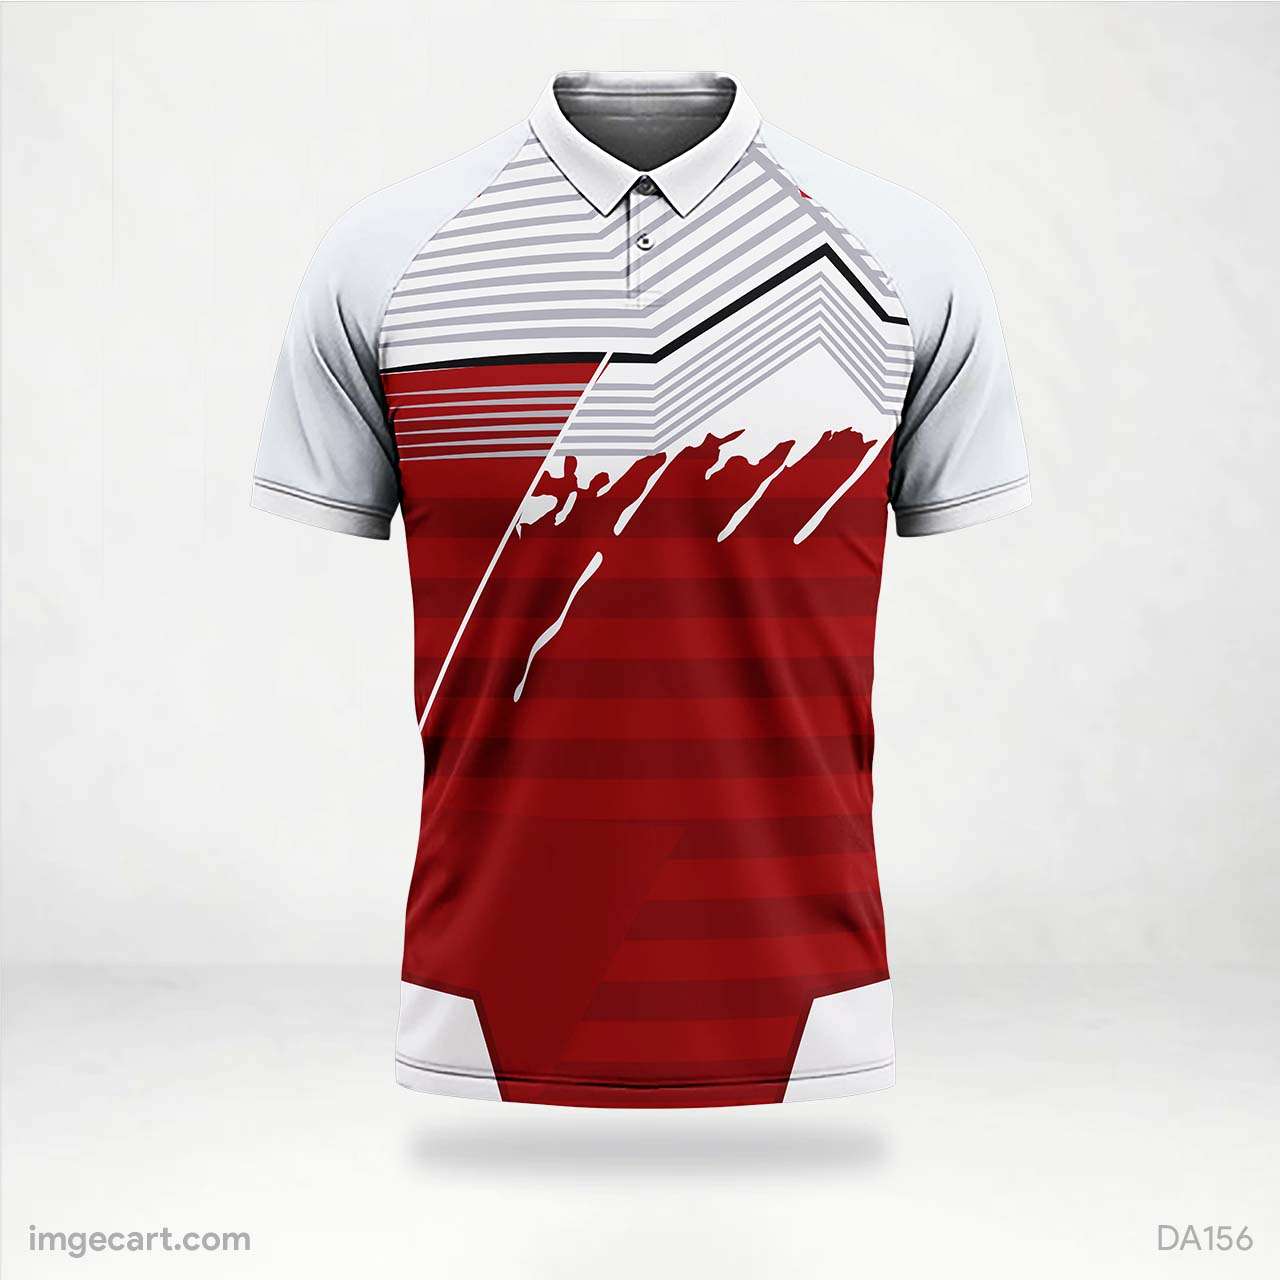 Cricket Jersey Design Red and White - imgecart